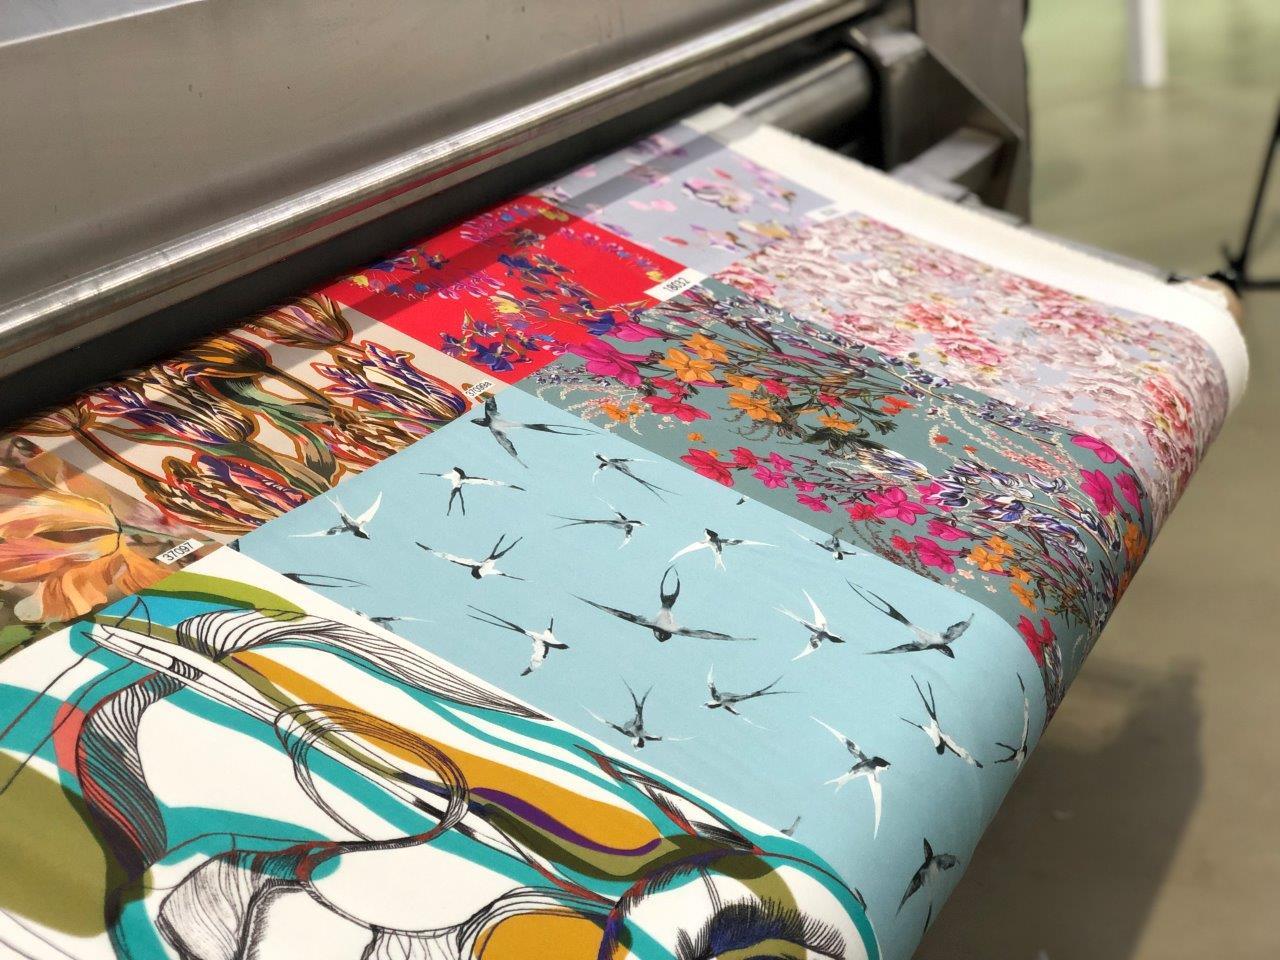 Sergei Sobyanin launched a new textile printing factory